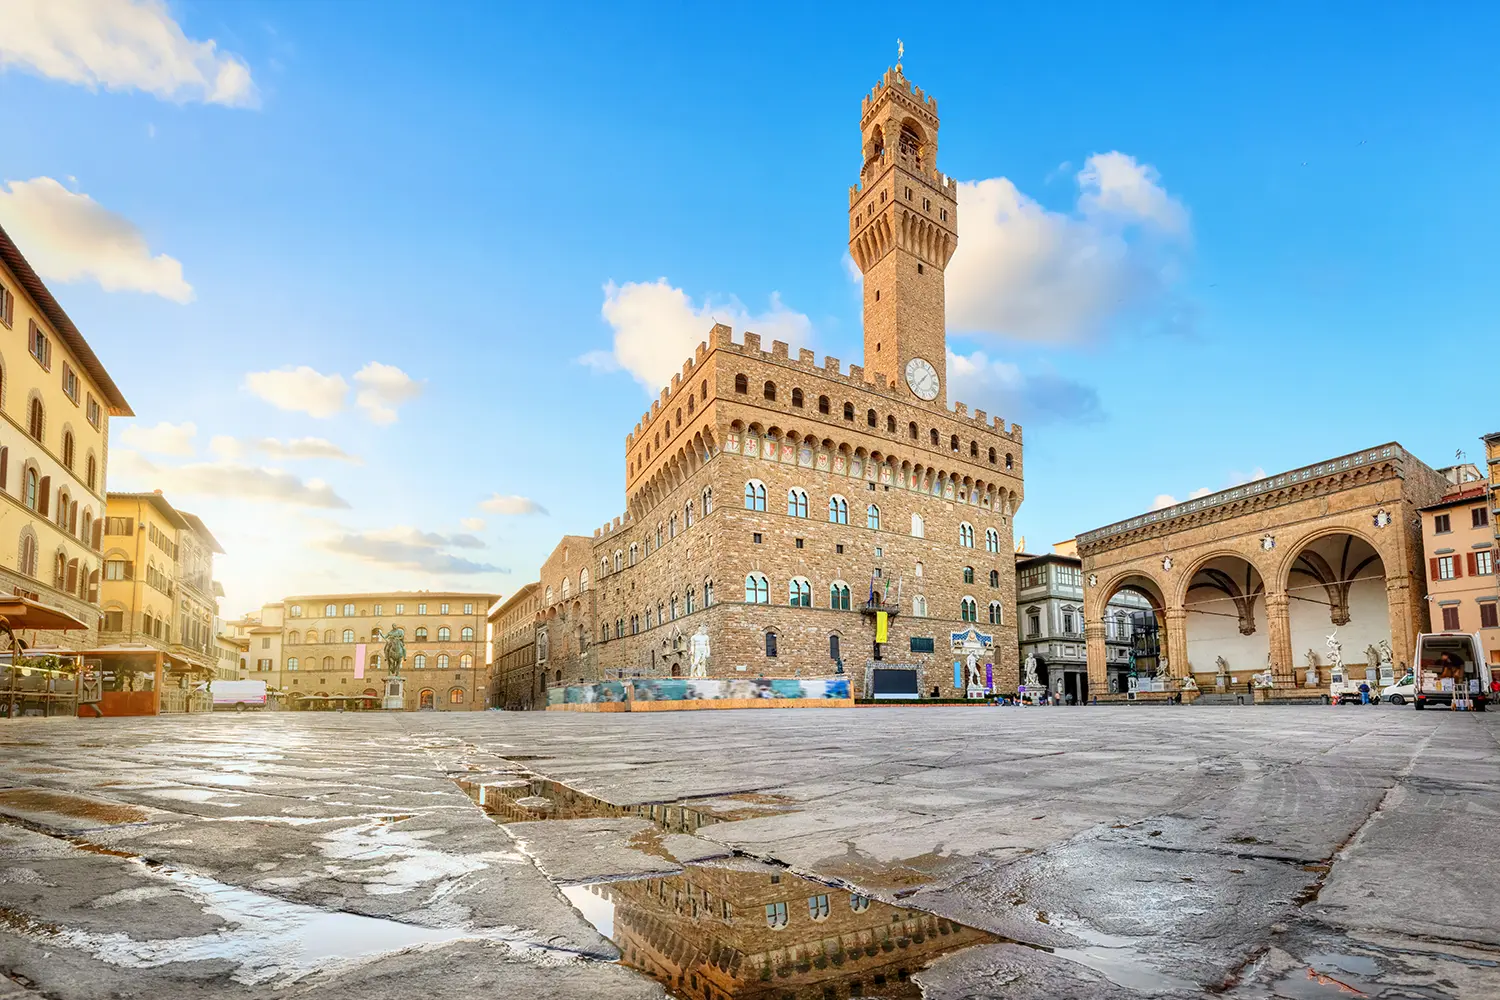 View of Piazza della Signoria square with Palazzo Vecchio reflecting in a puddle at sunrise in Florence, Italy